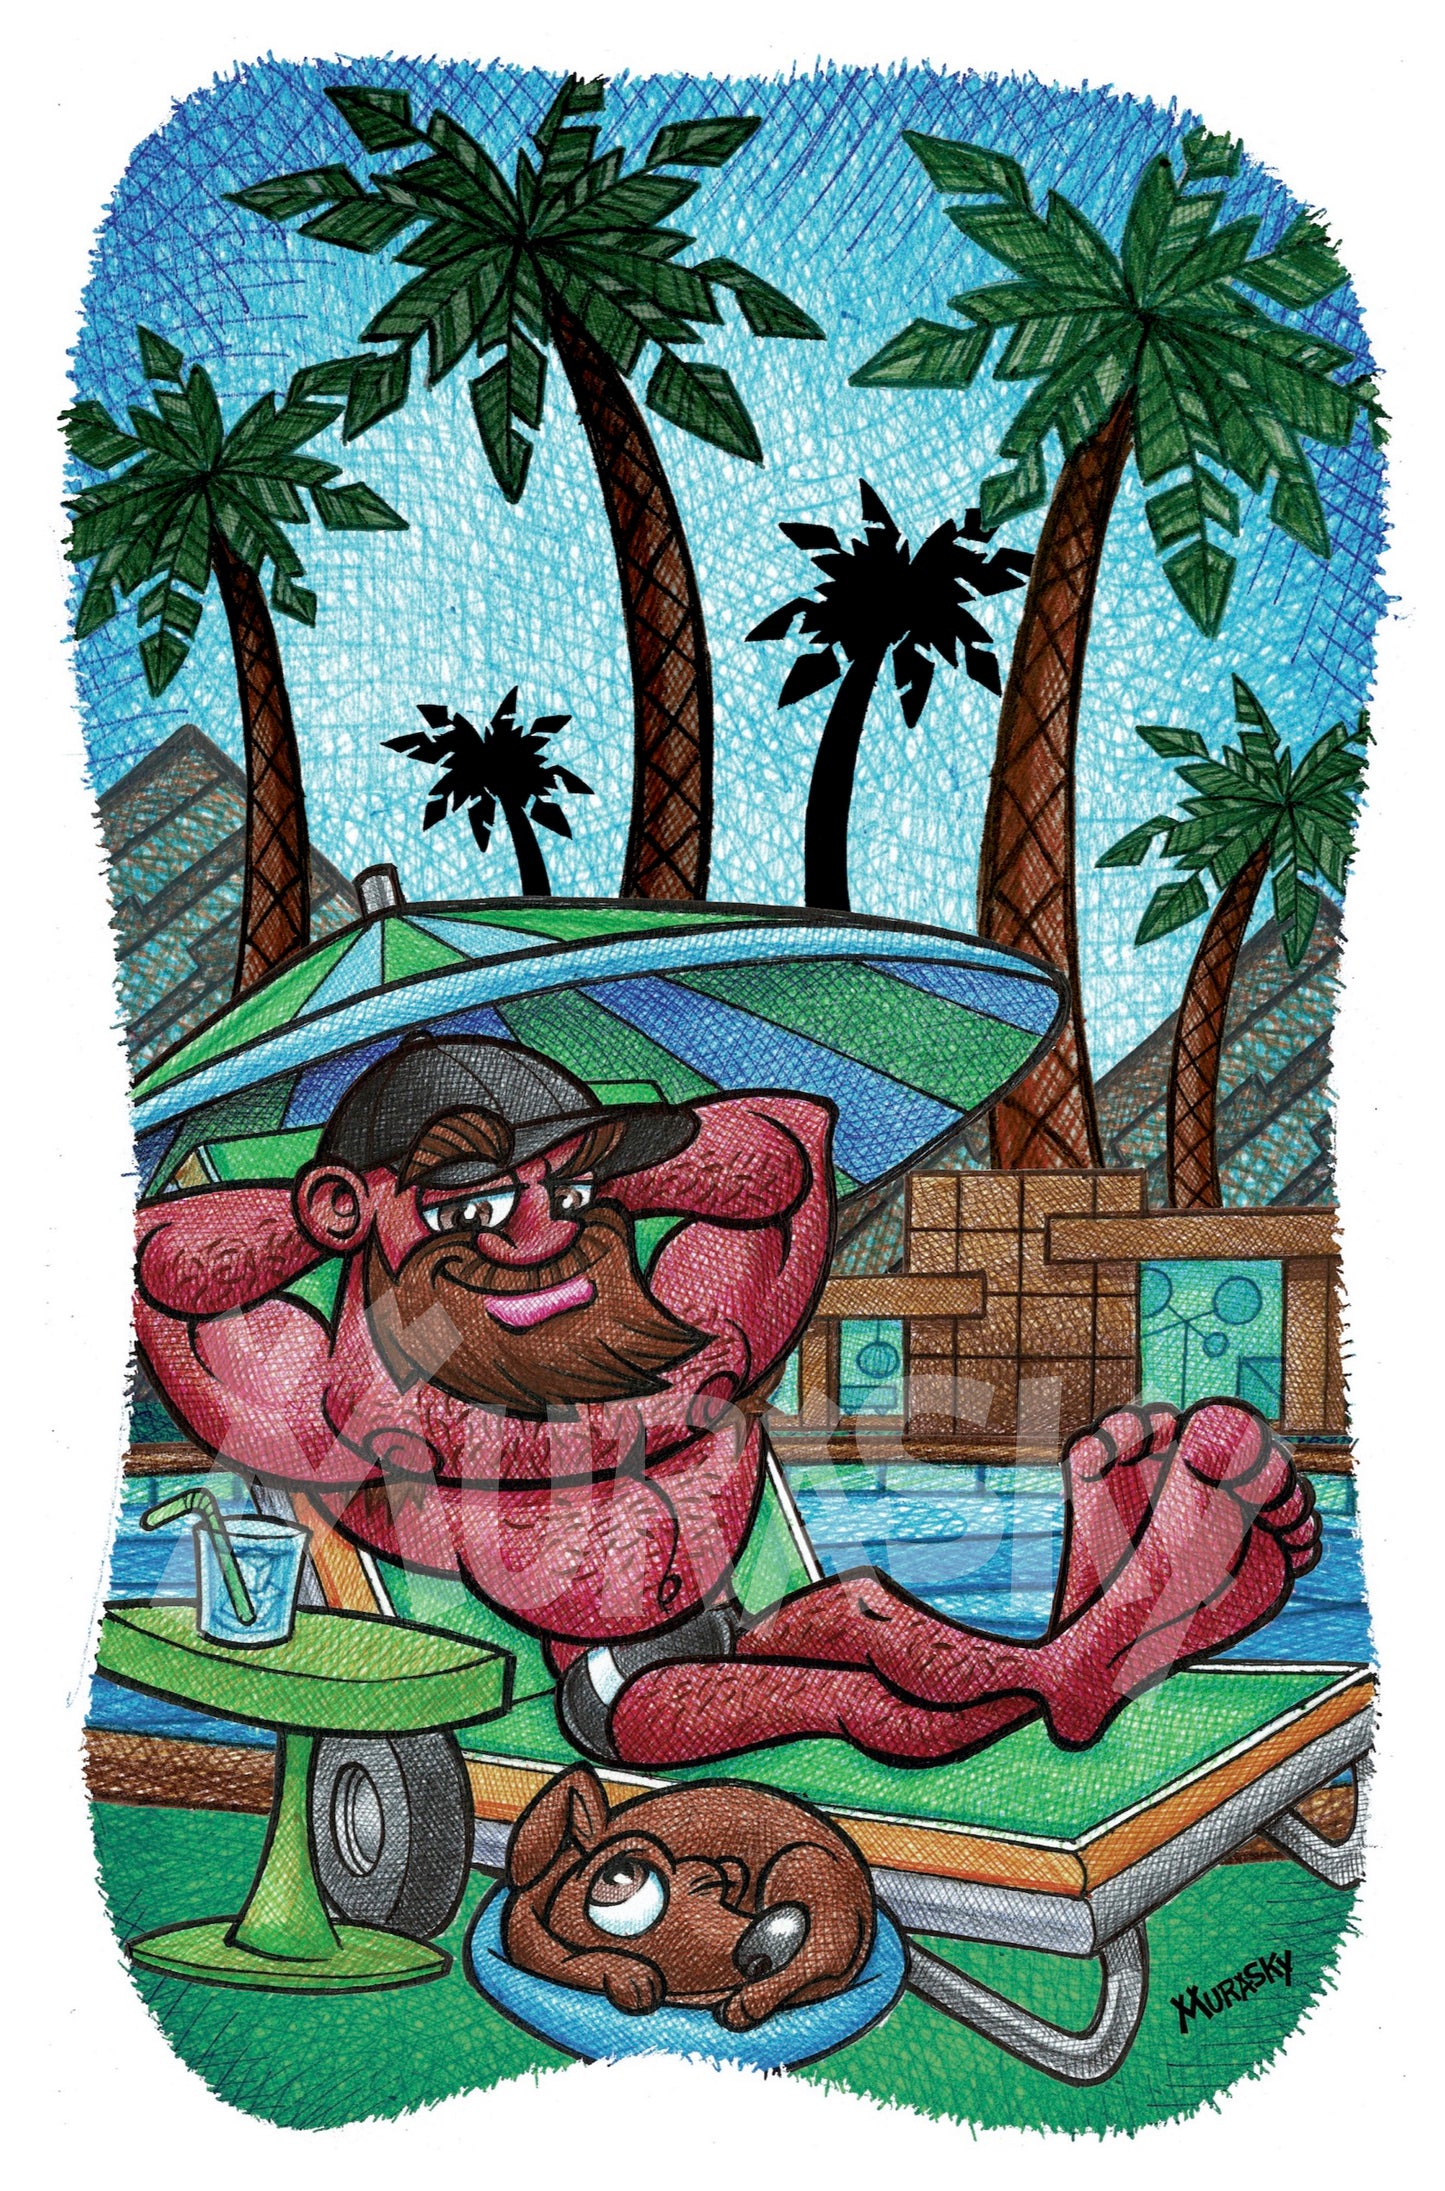 Man in bathing suit relaxing on a lounge, poolside, with his dog napping beside him.